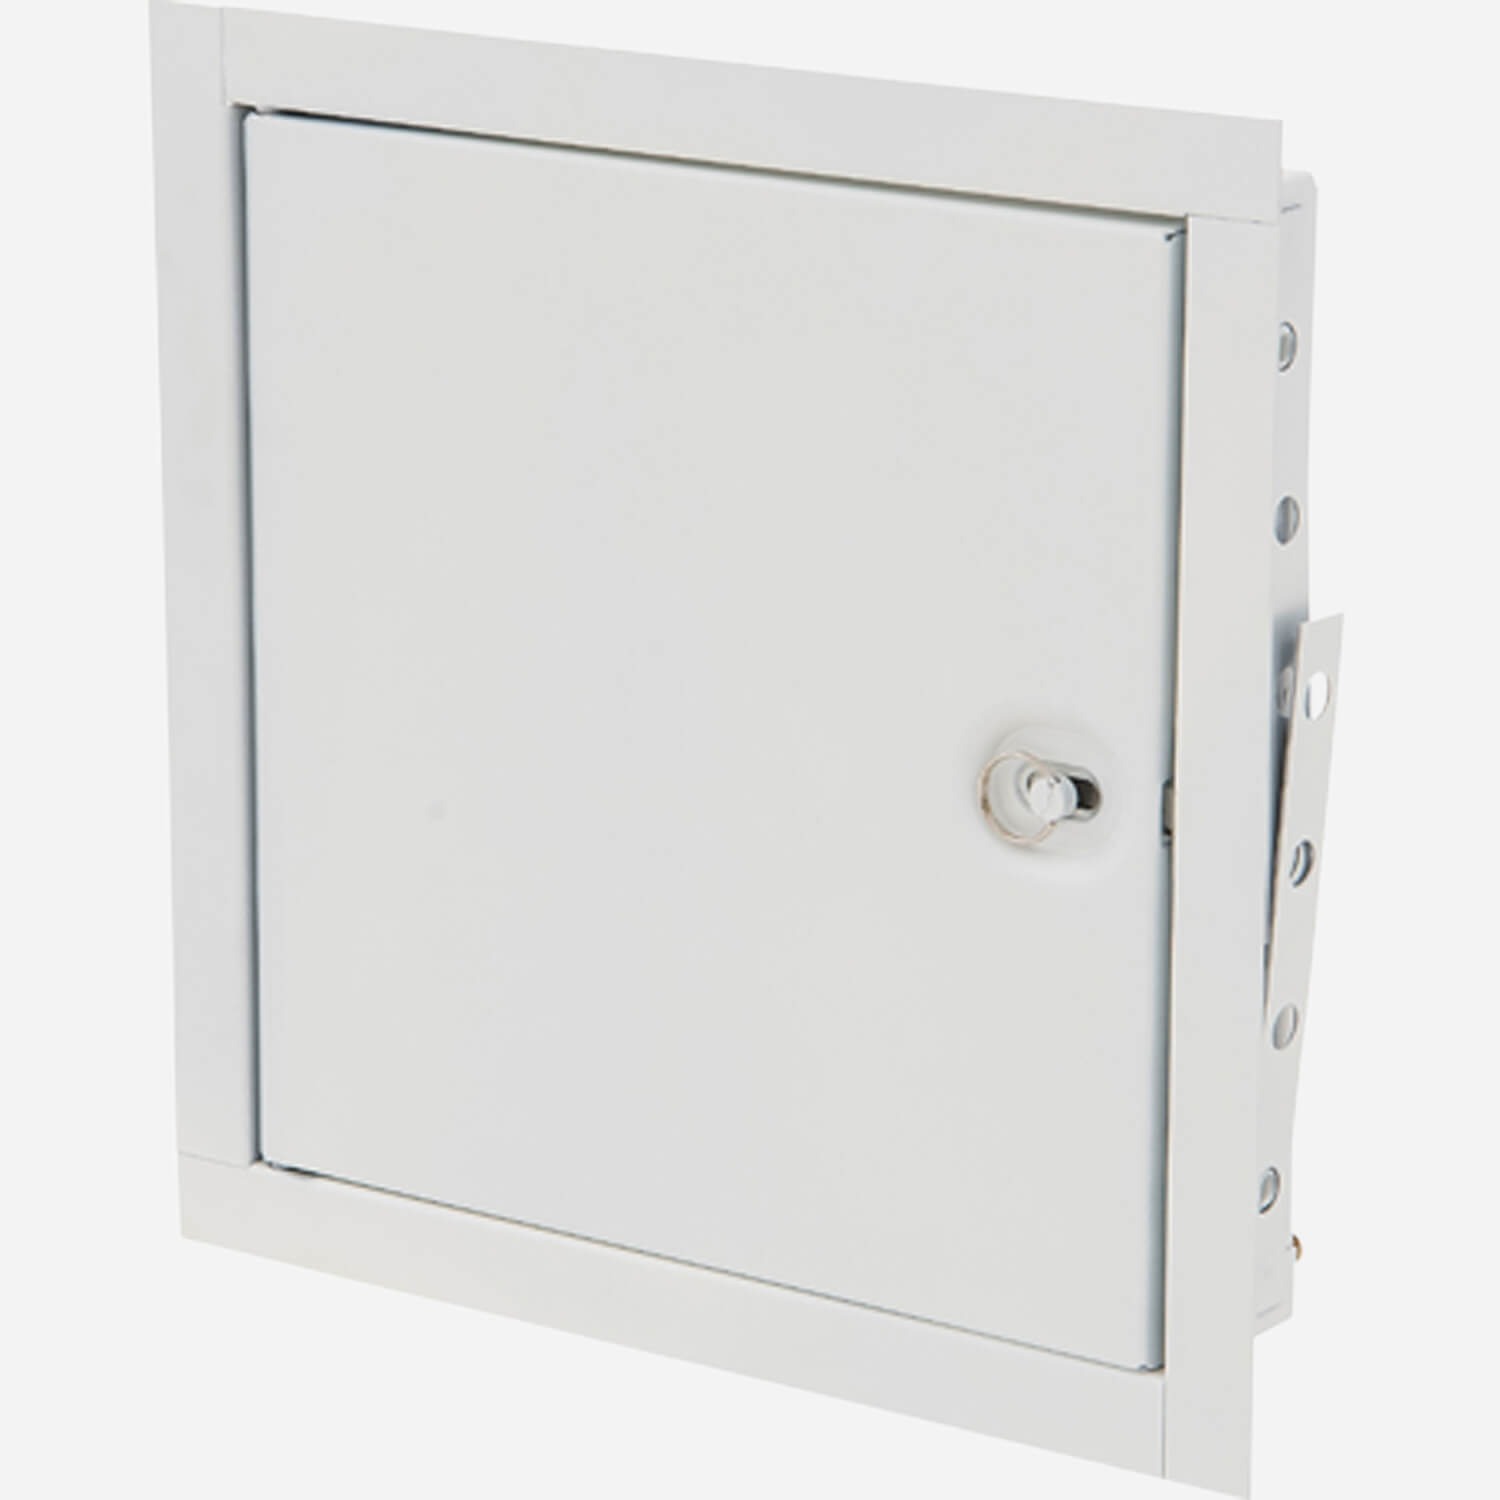 Access Door - E-FR  8" x 8" Non-Insulated Fire Rated for Walls